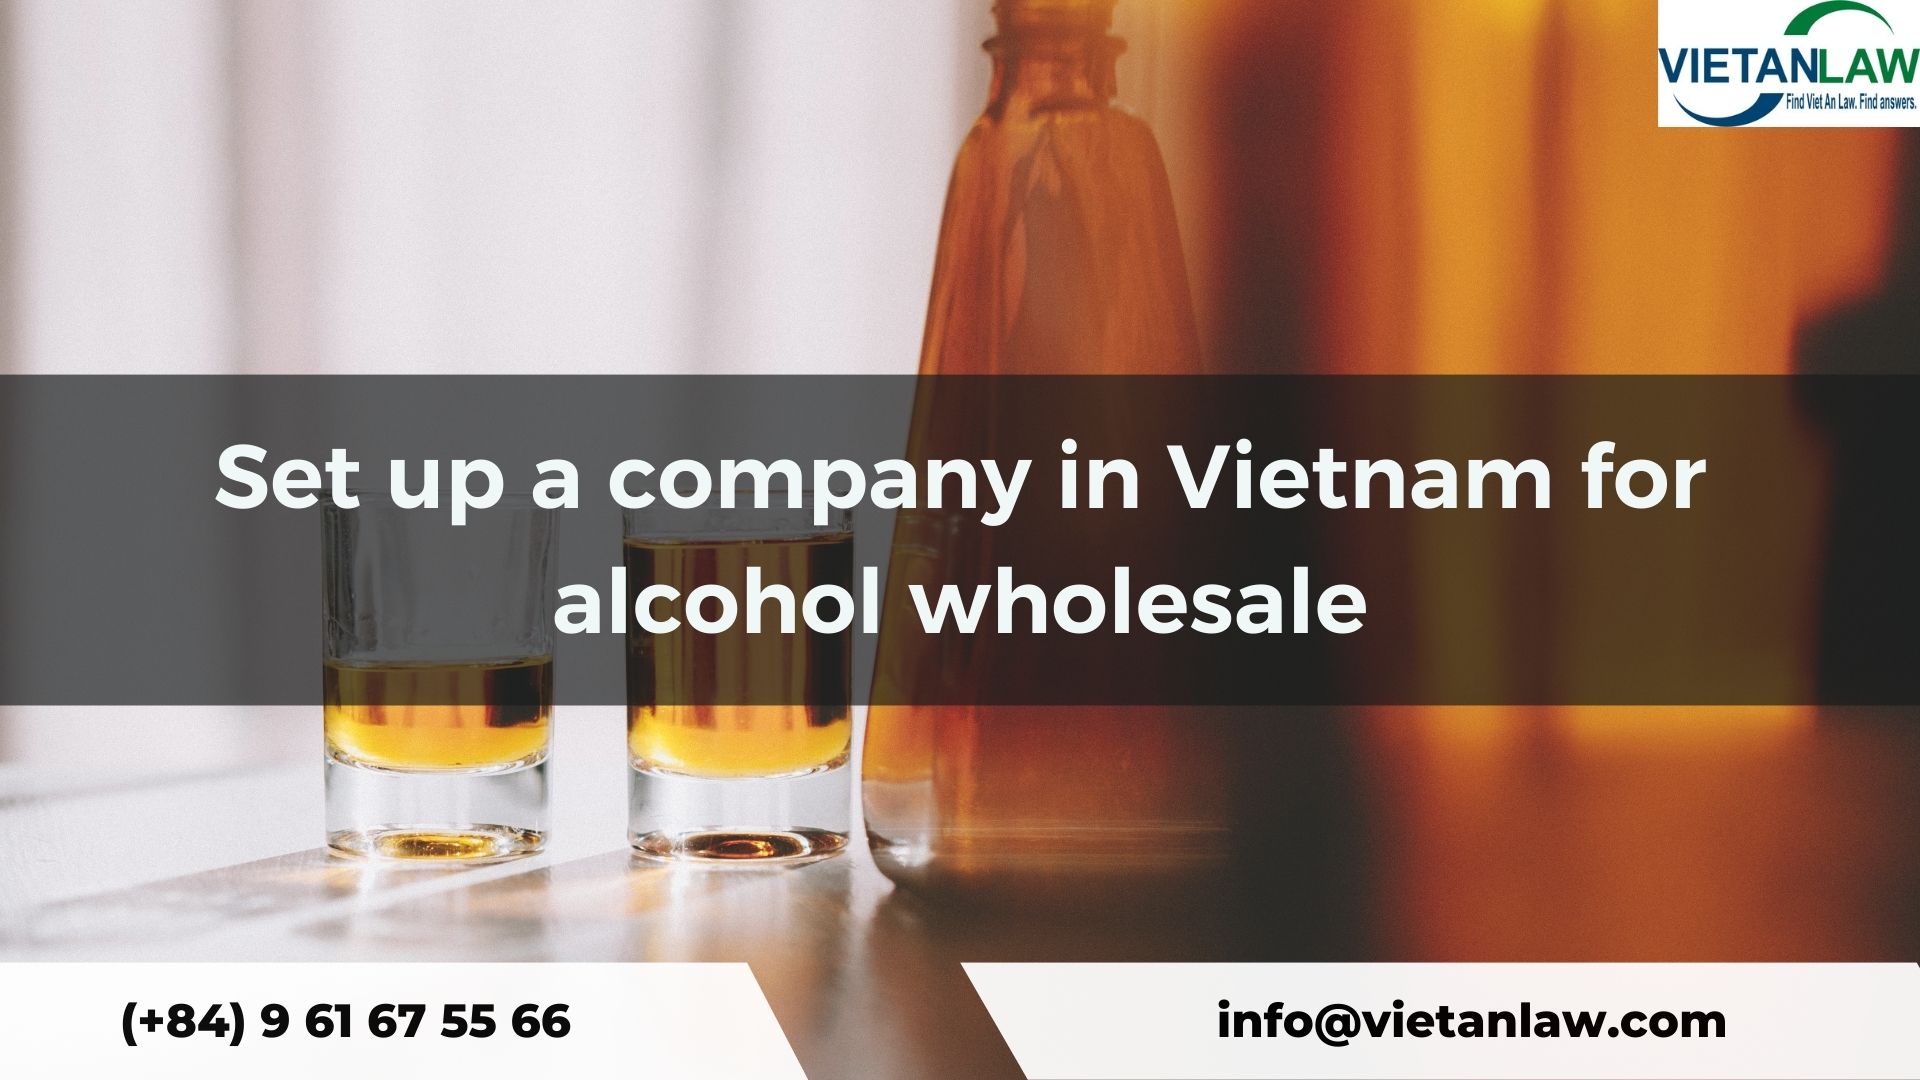 Set up a company in Vietnam for alcohol wholesale